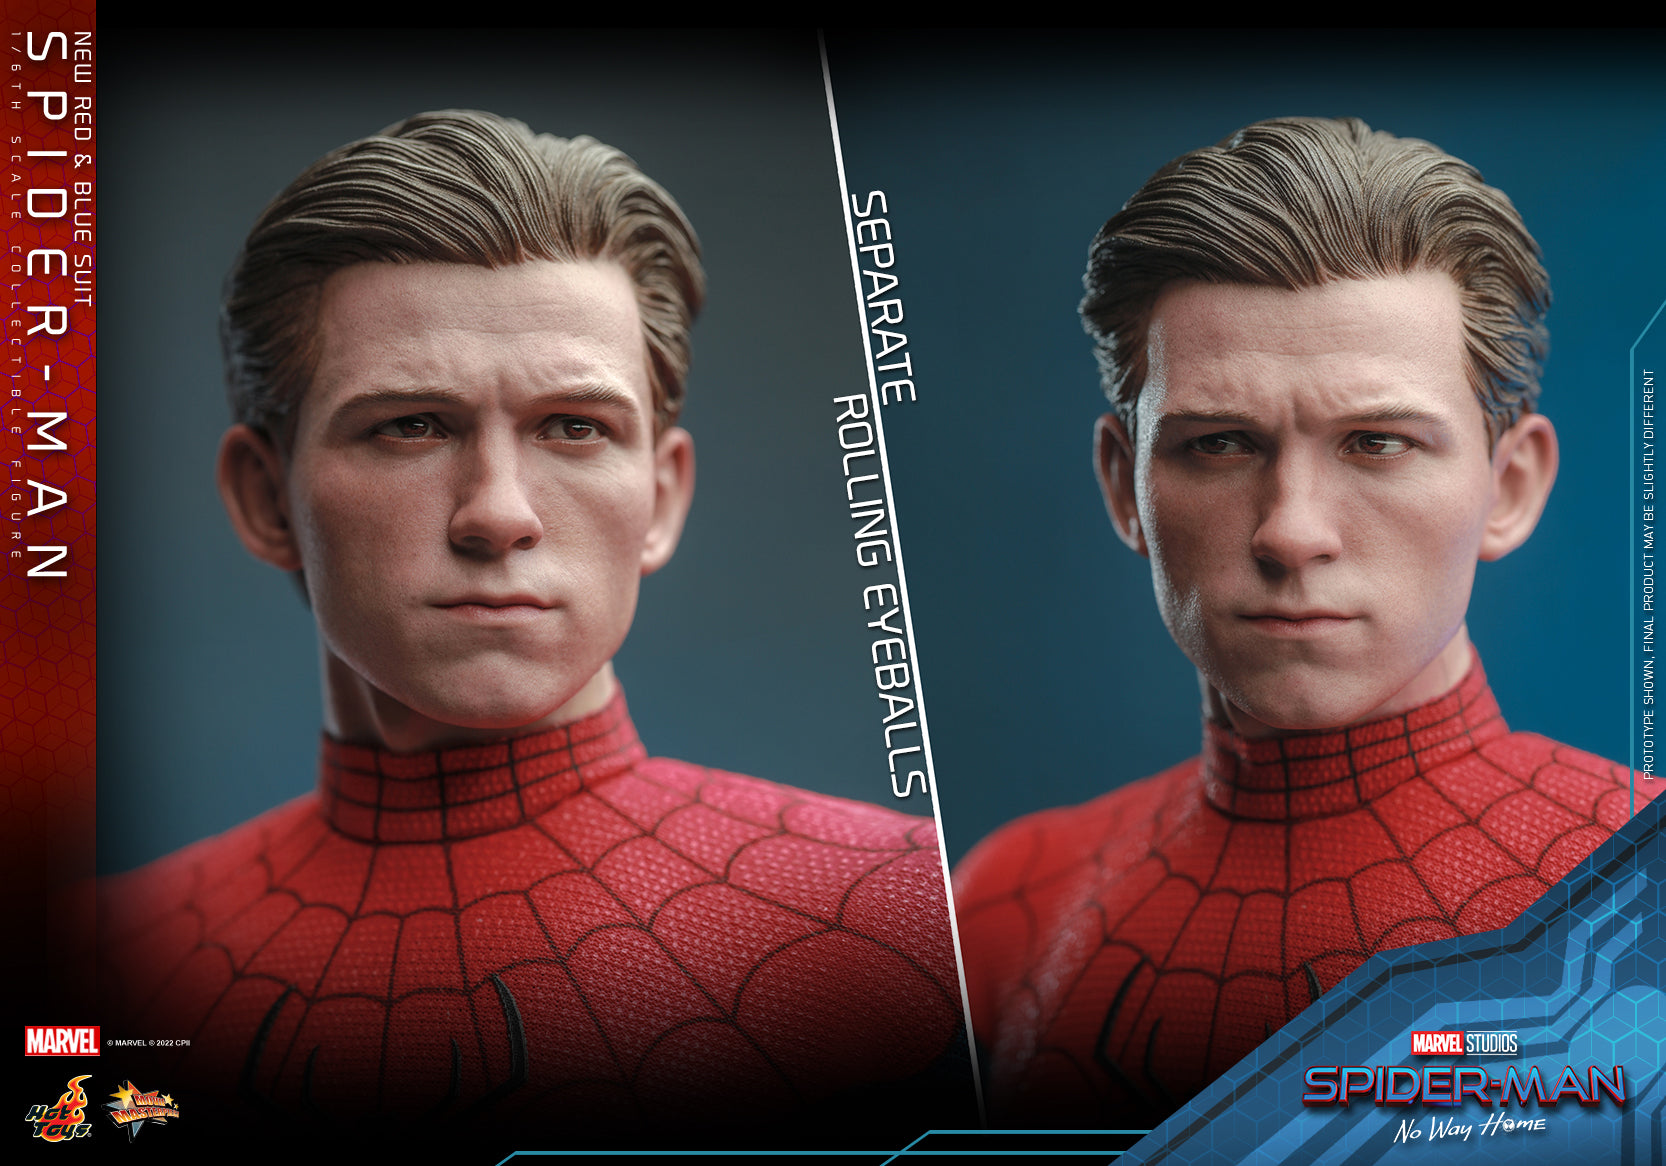 Hot Toys - MMS679 - Spider-Man: No Way Home - Spider-Man (New Red and Blue Suit) - Marvelous Toys